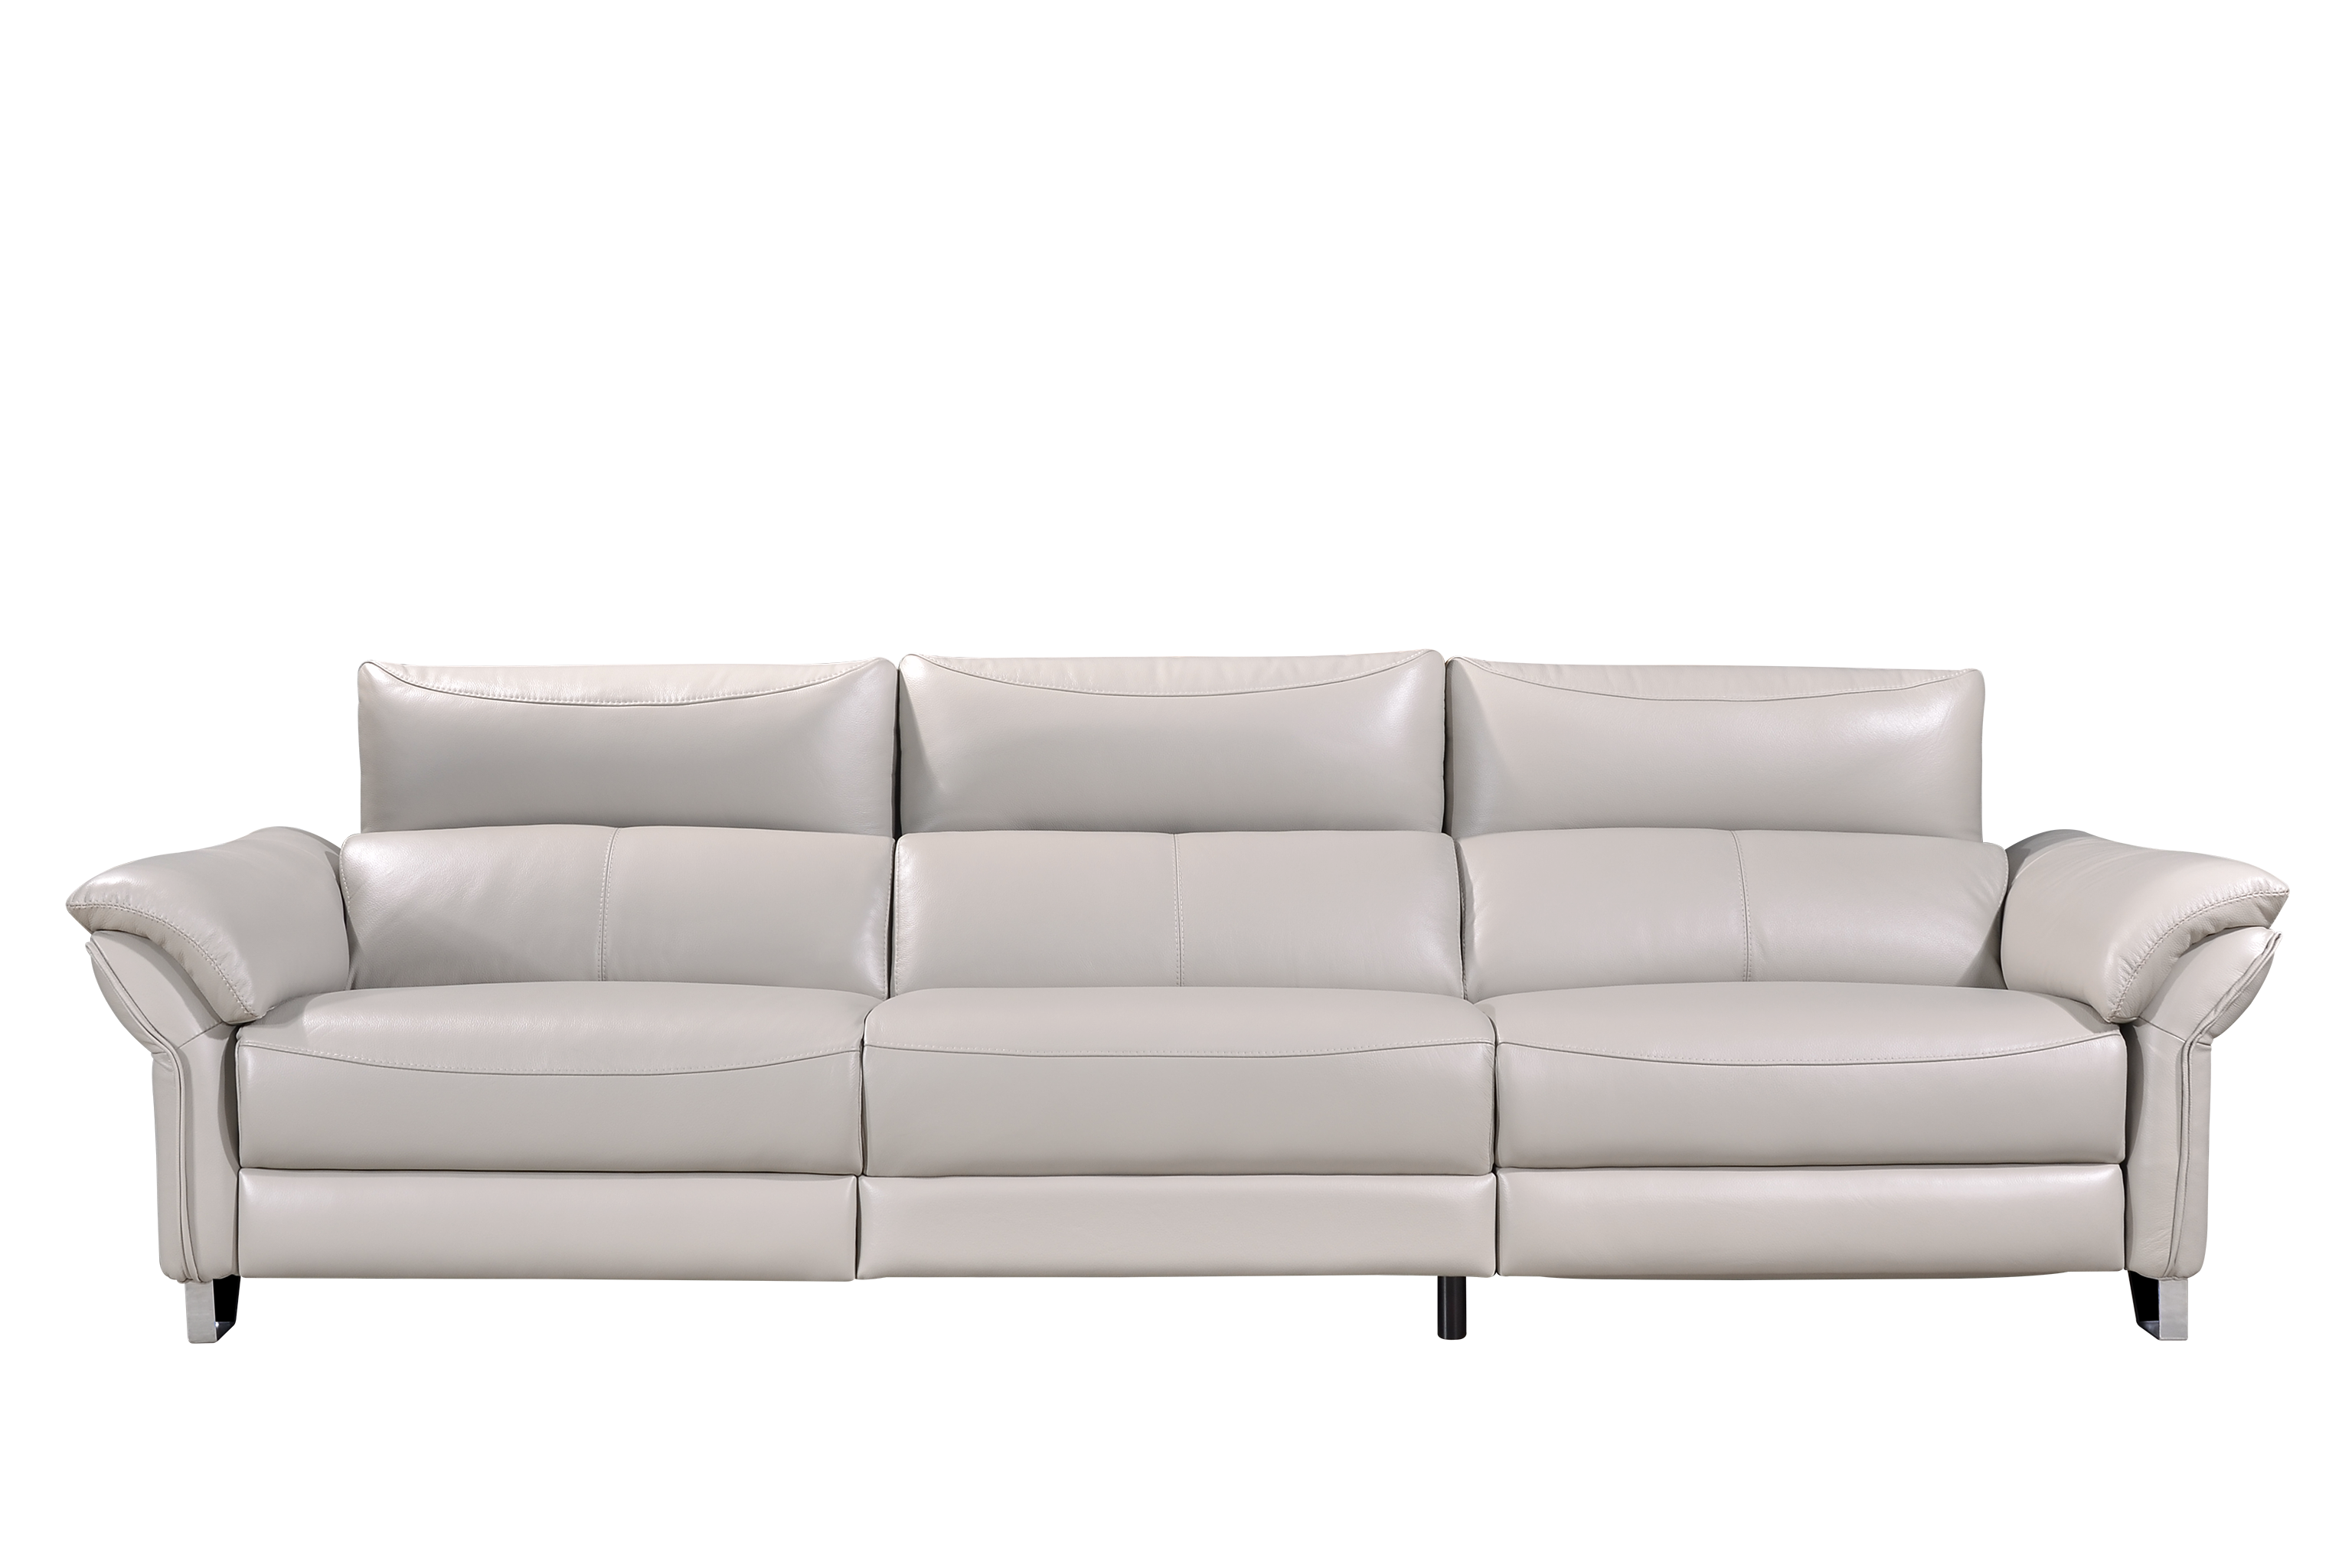 TOMAS Made-in-Italy Top-Grain Leather Recliner Sofa by Castilla